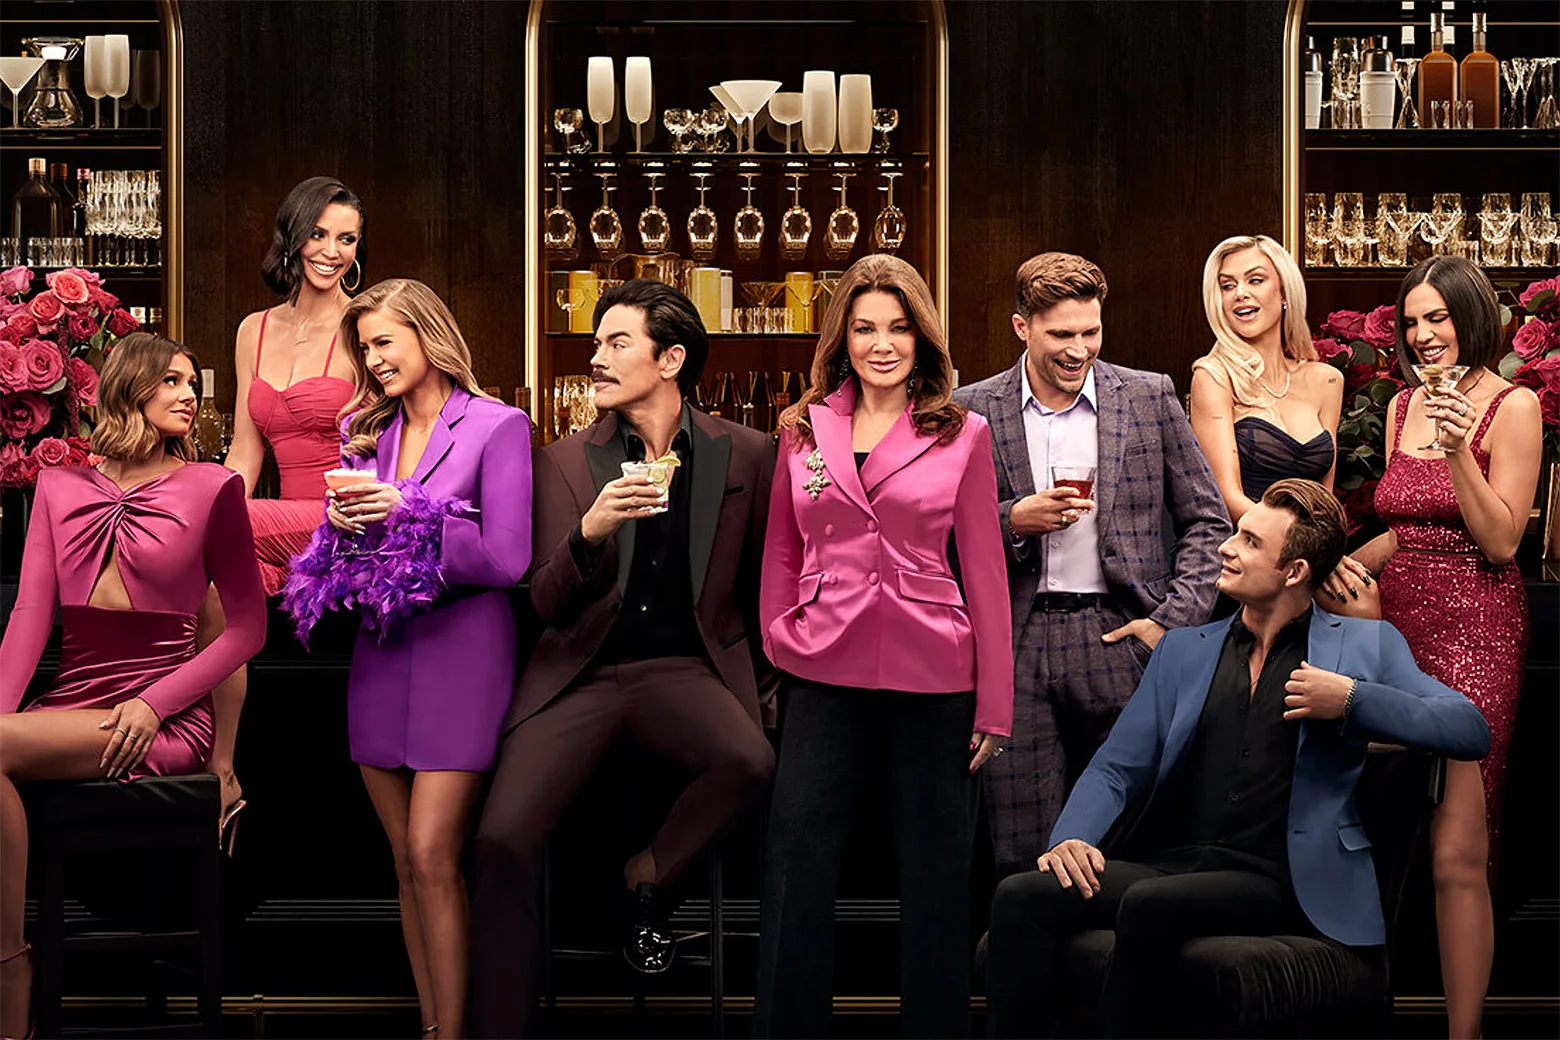 Exclusive Sneak Peek Everything Unveiled About the Anticipated 11th Season of Vanderpump Rules